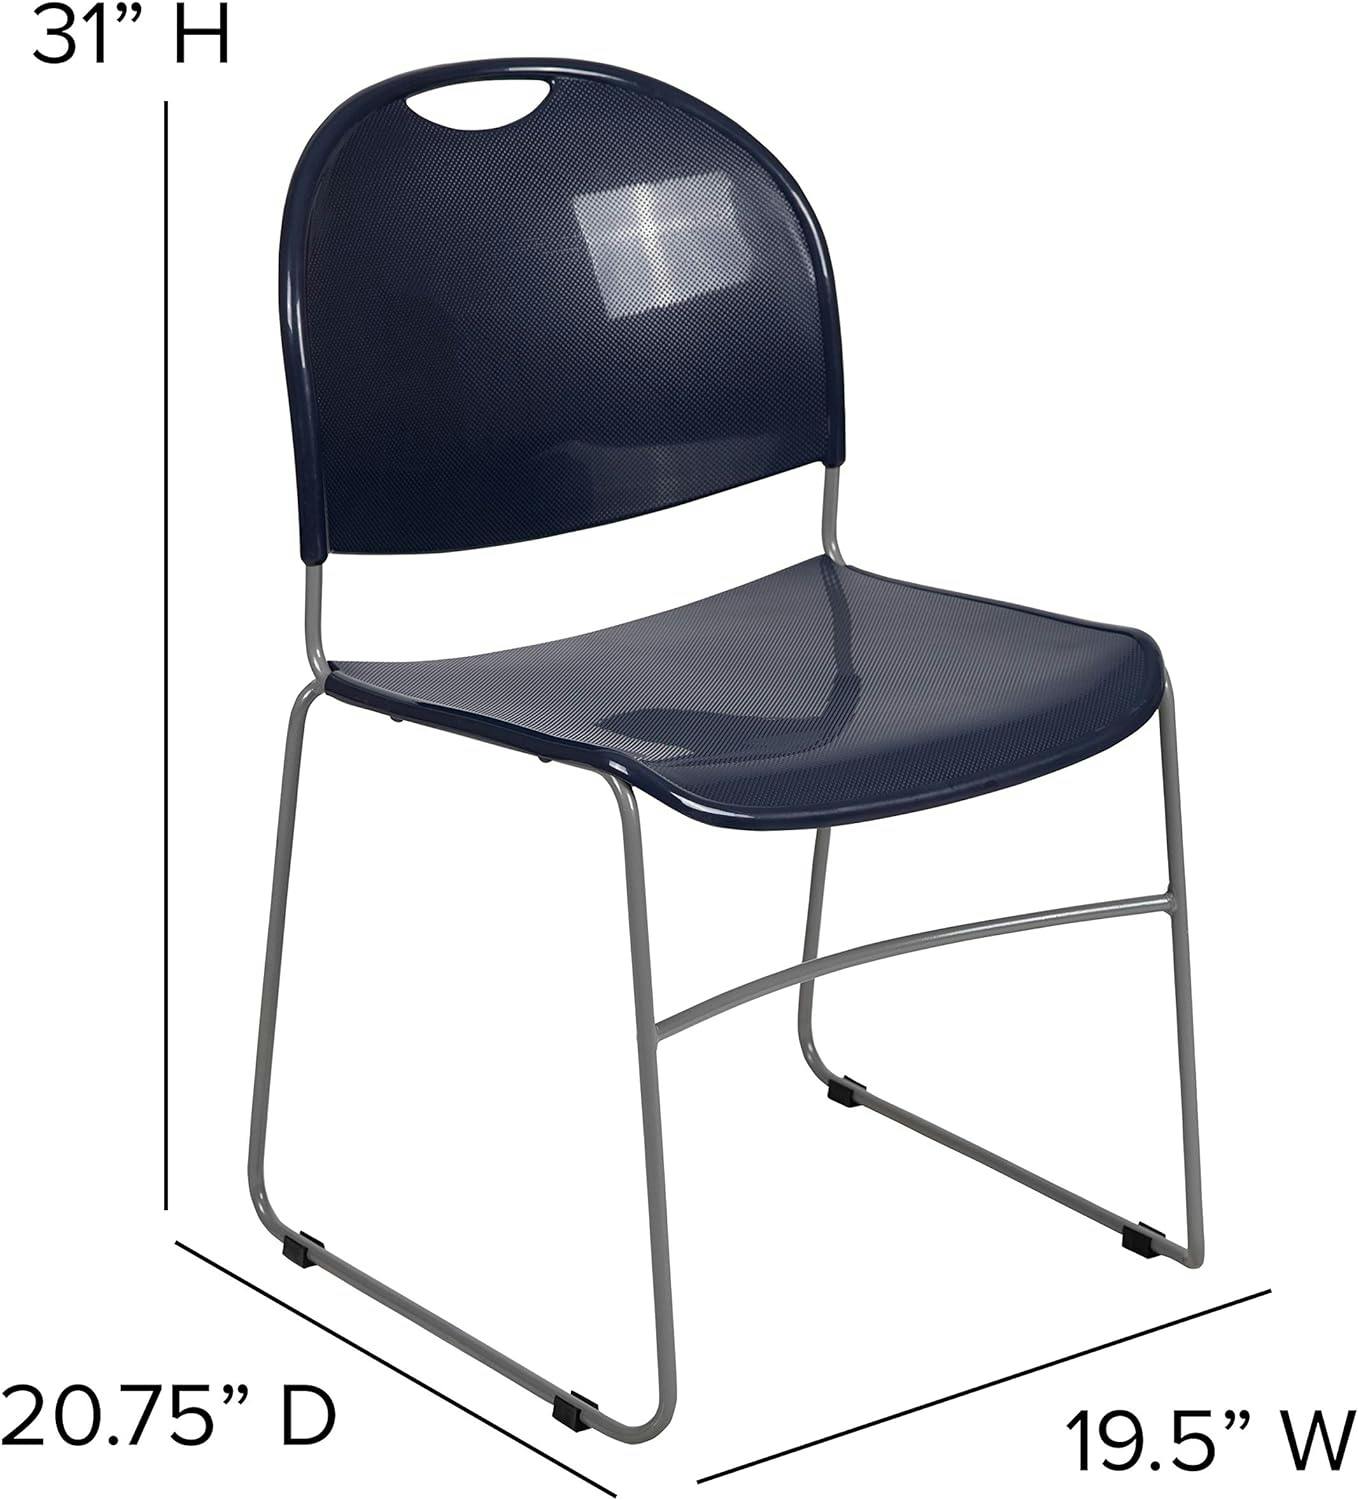 Modern Sleek Silver Metal Stackable Chair with Navy Seat